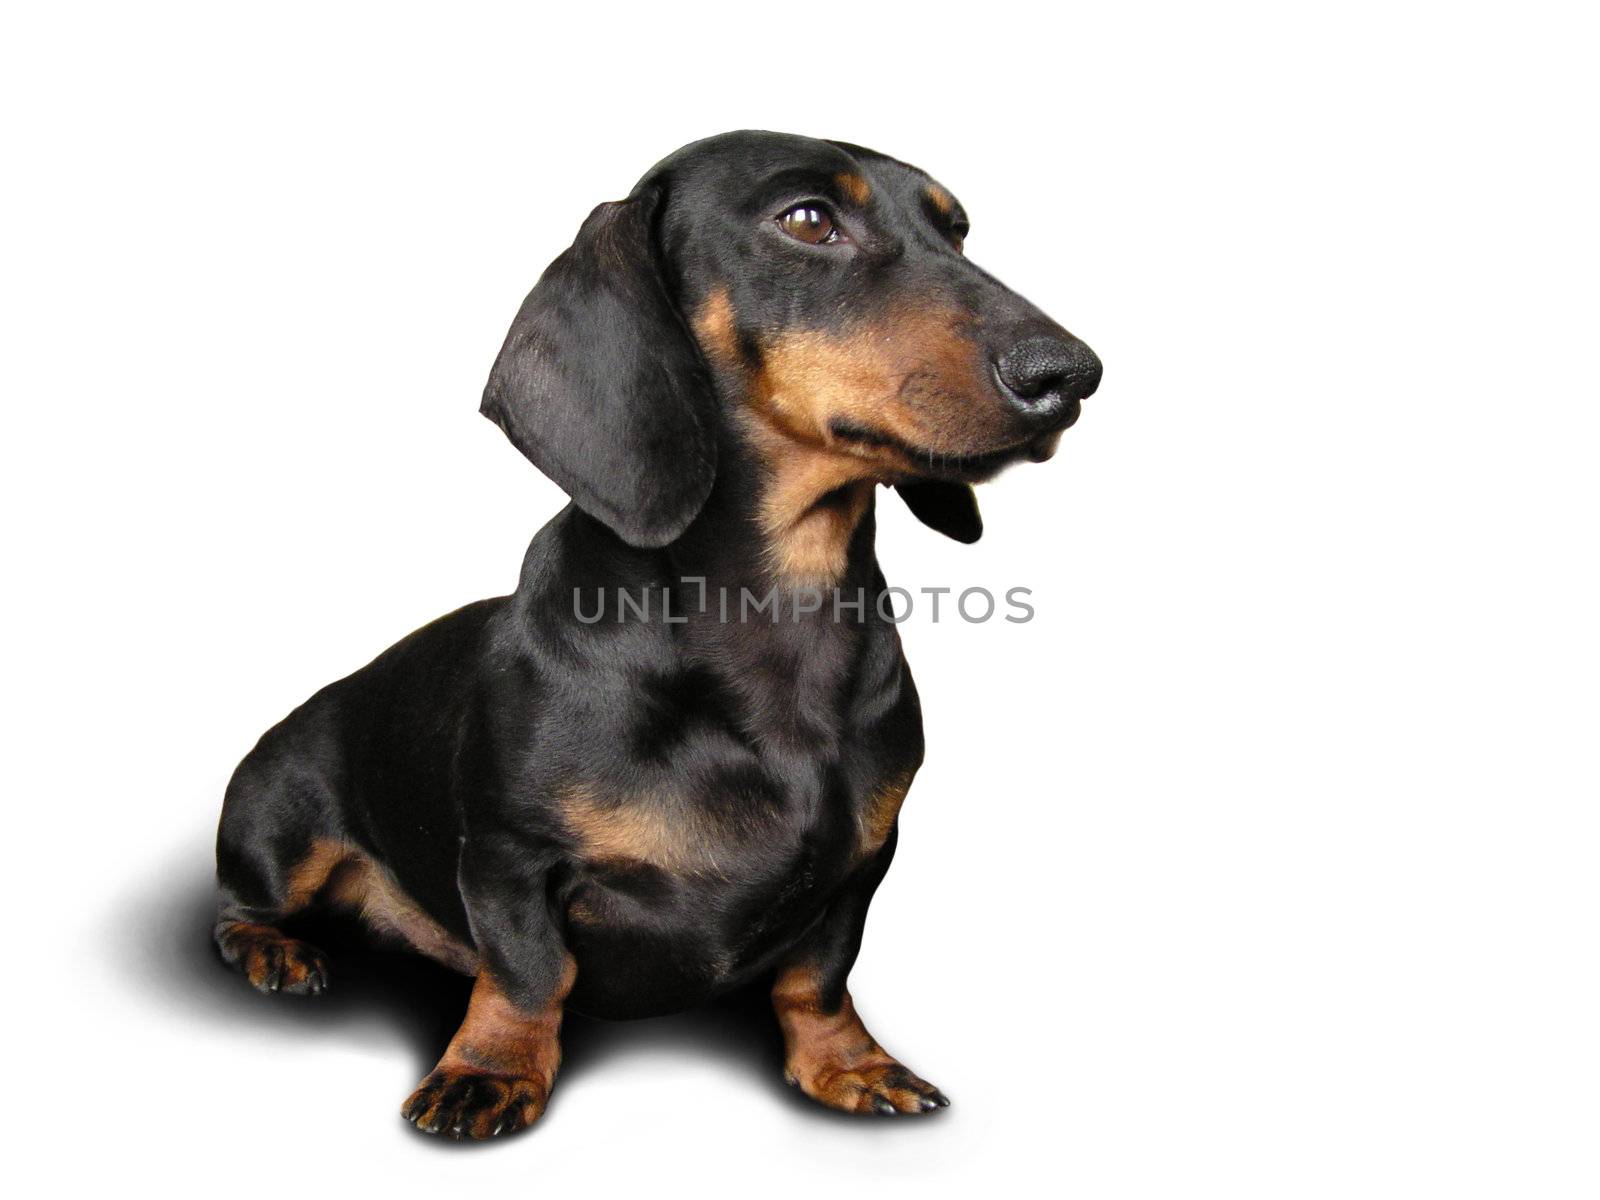 Black and brown dog (dachshund) on white background